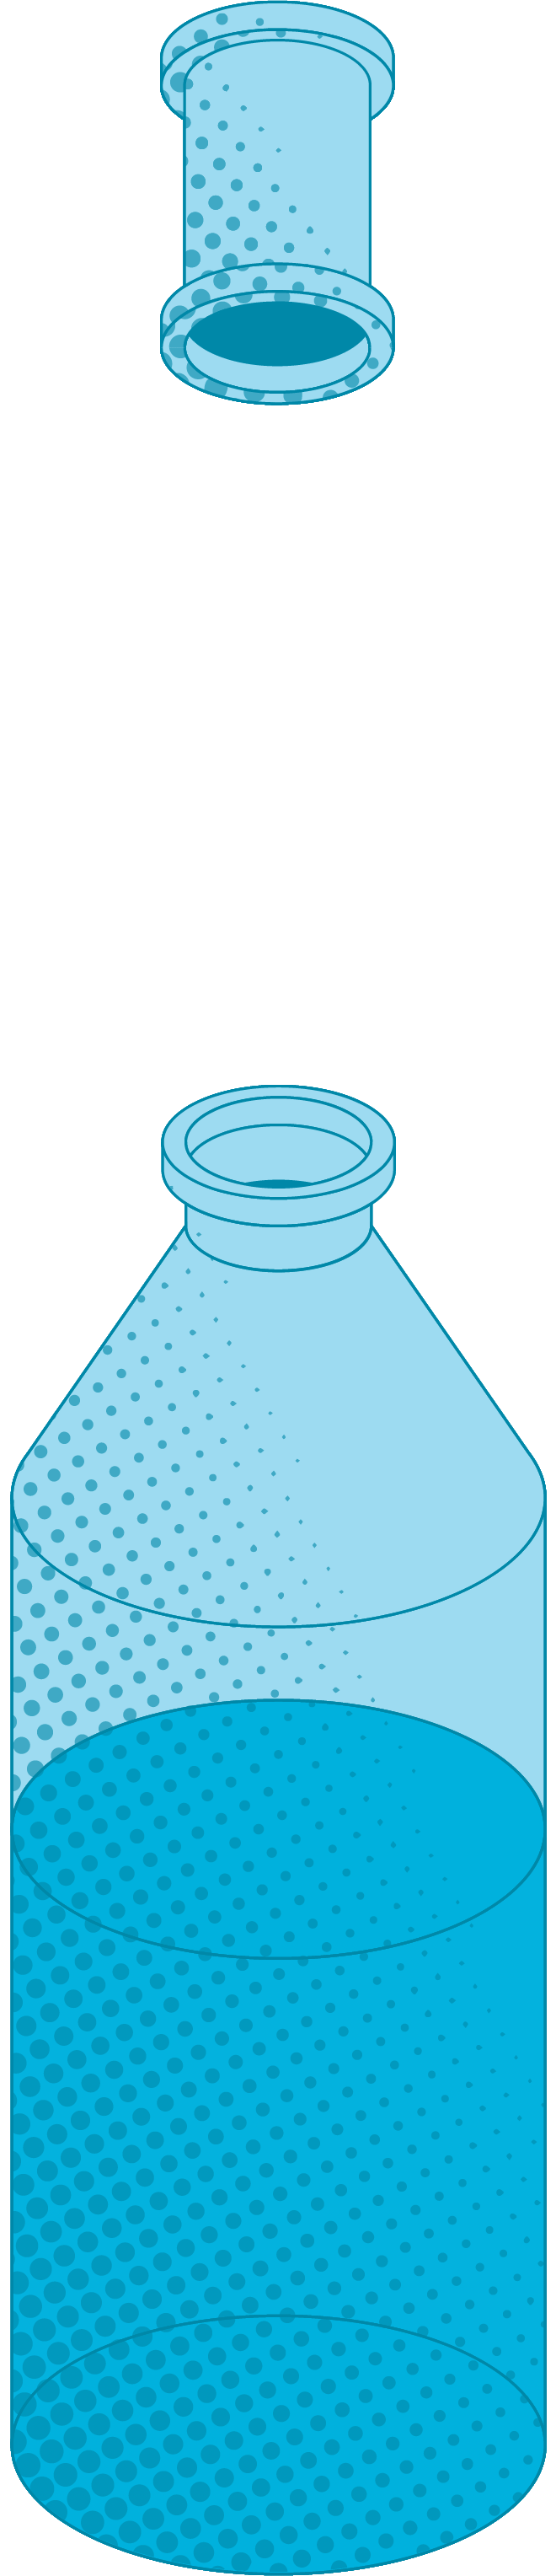 isometric illustartion of a pipe dripping water into a water bottle that is 35% empty